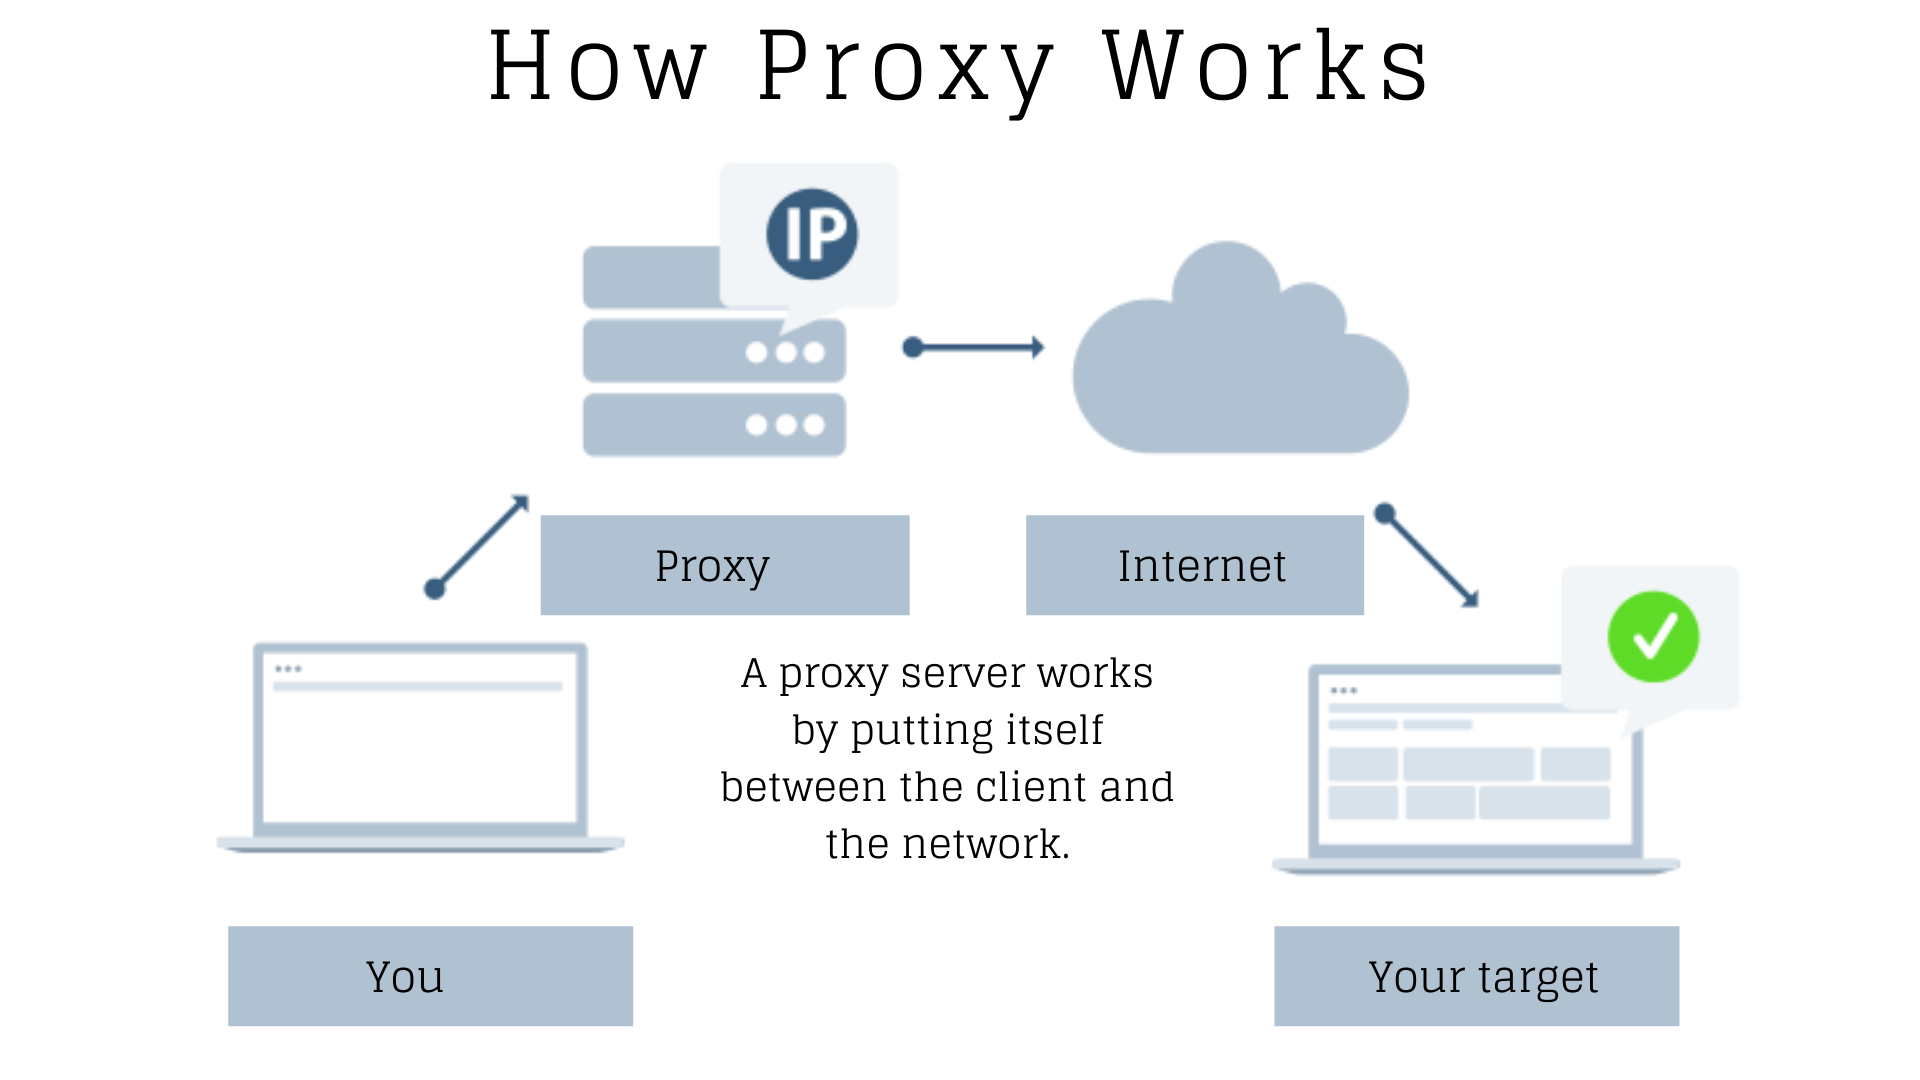 What does a proxy server do, exactly?